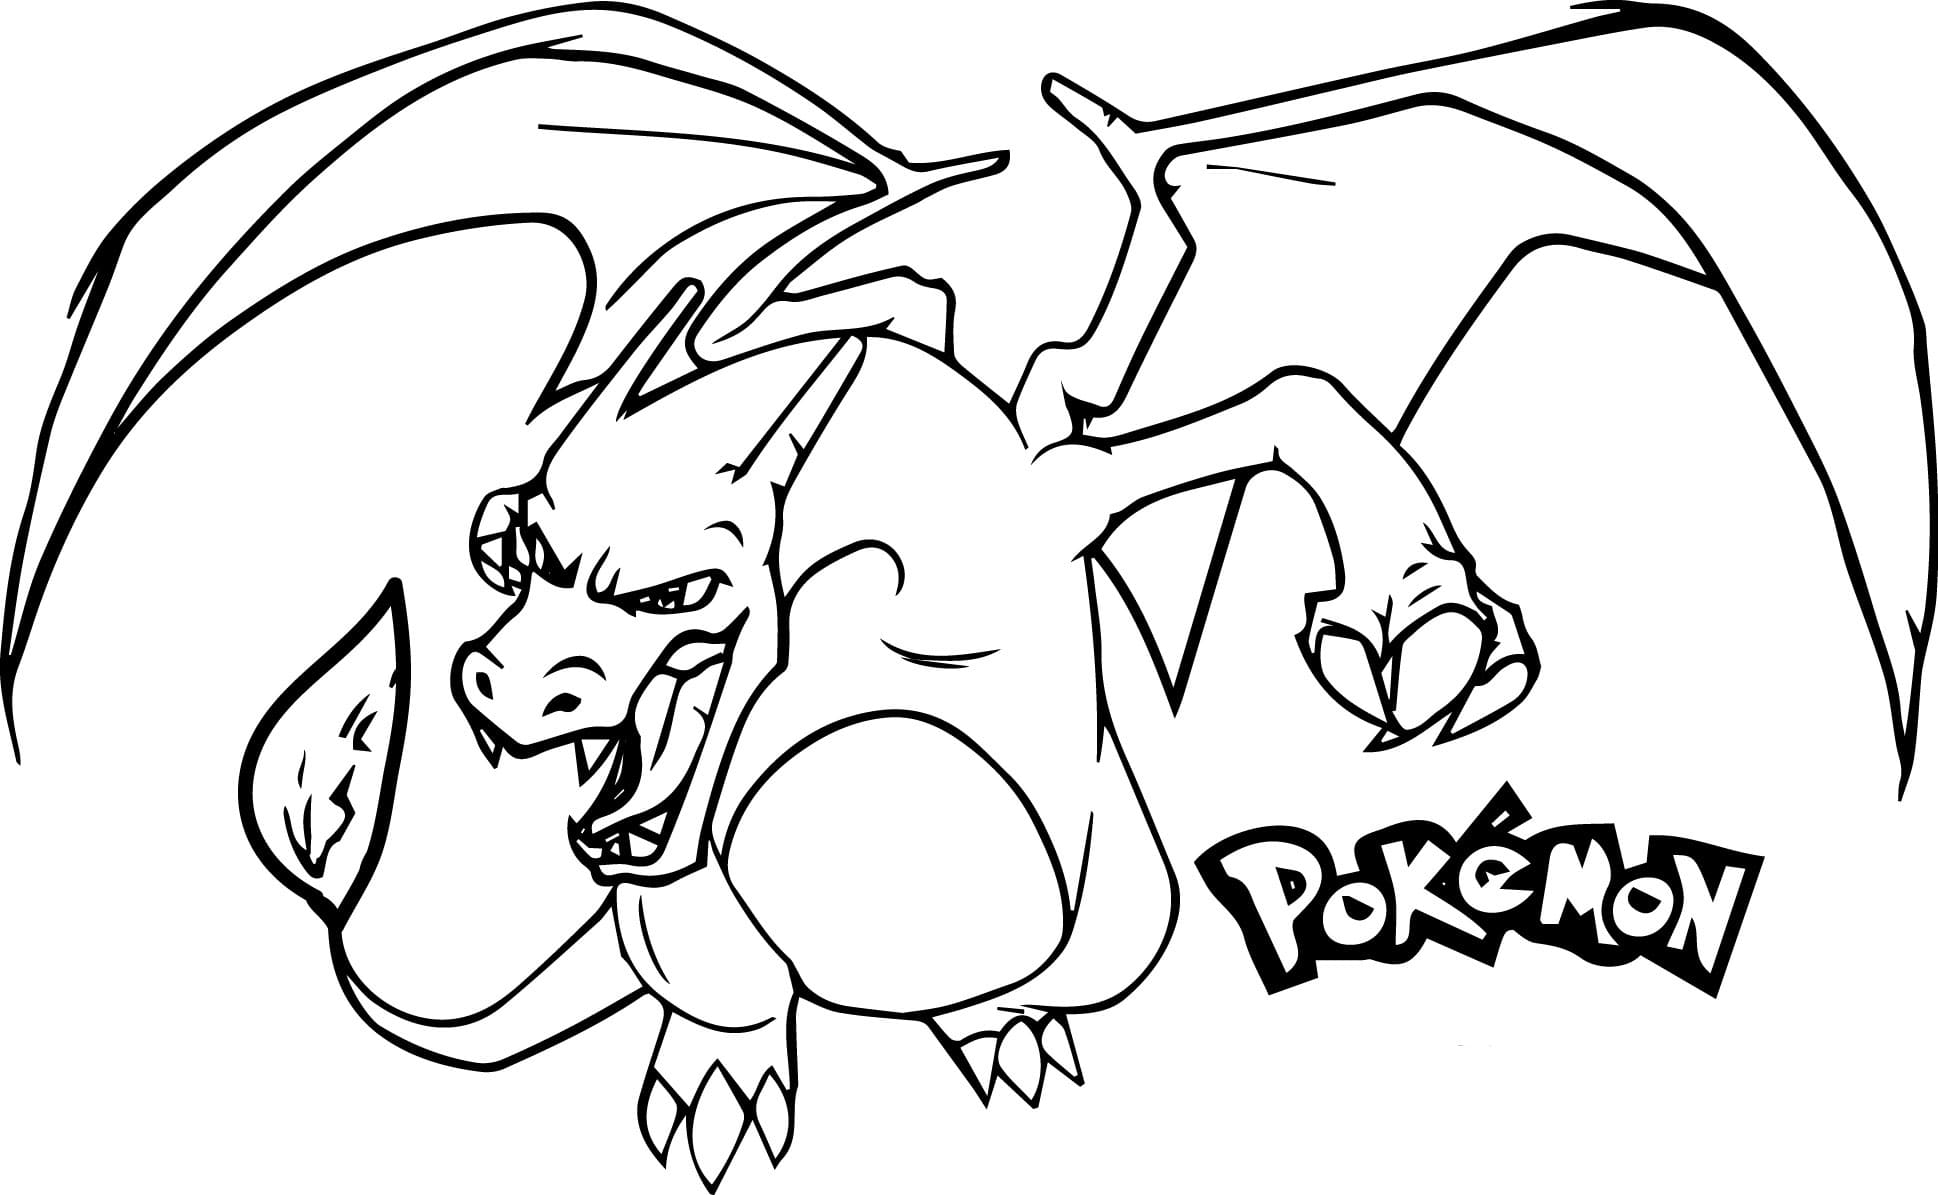 Charizard Coloring pages. Print for free WONDER DAY — Coloring pages